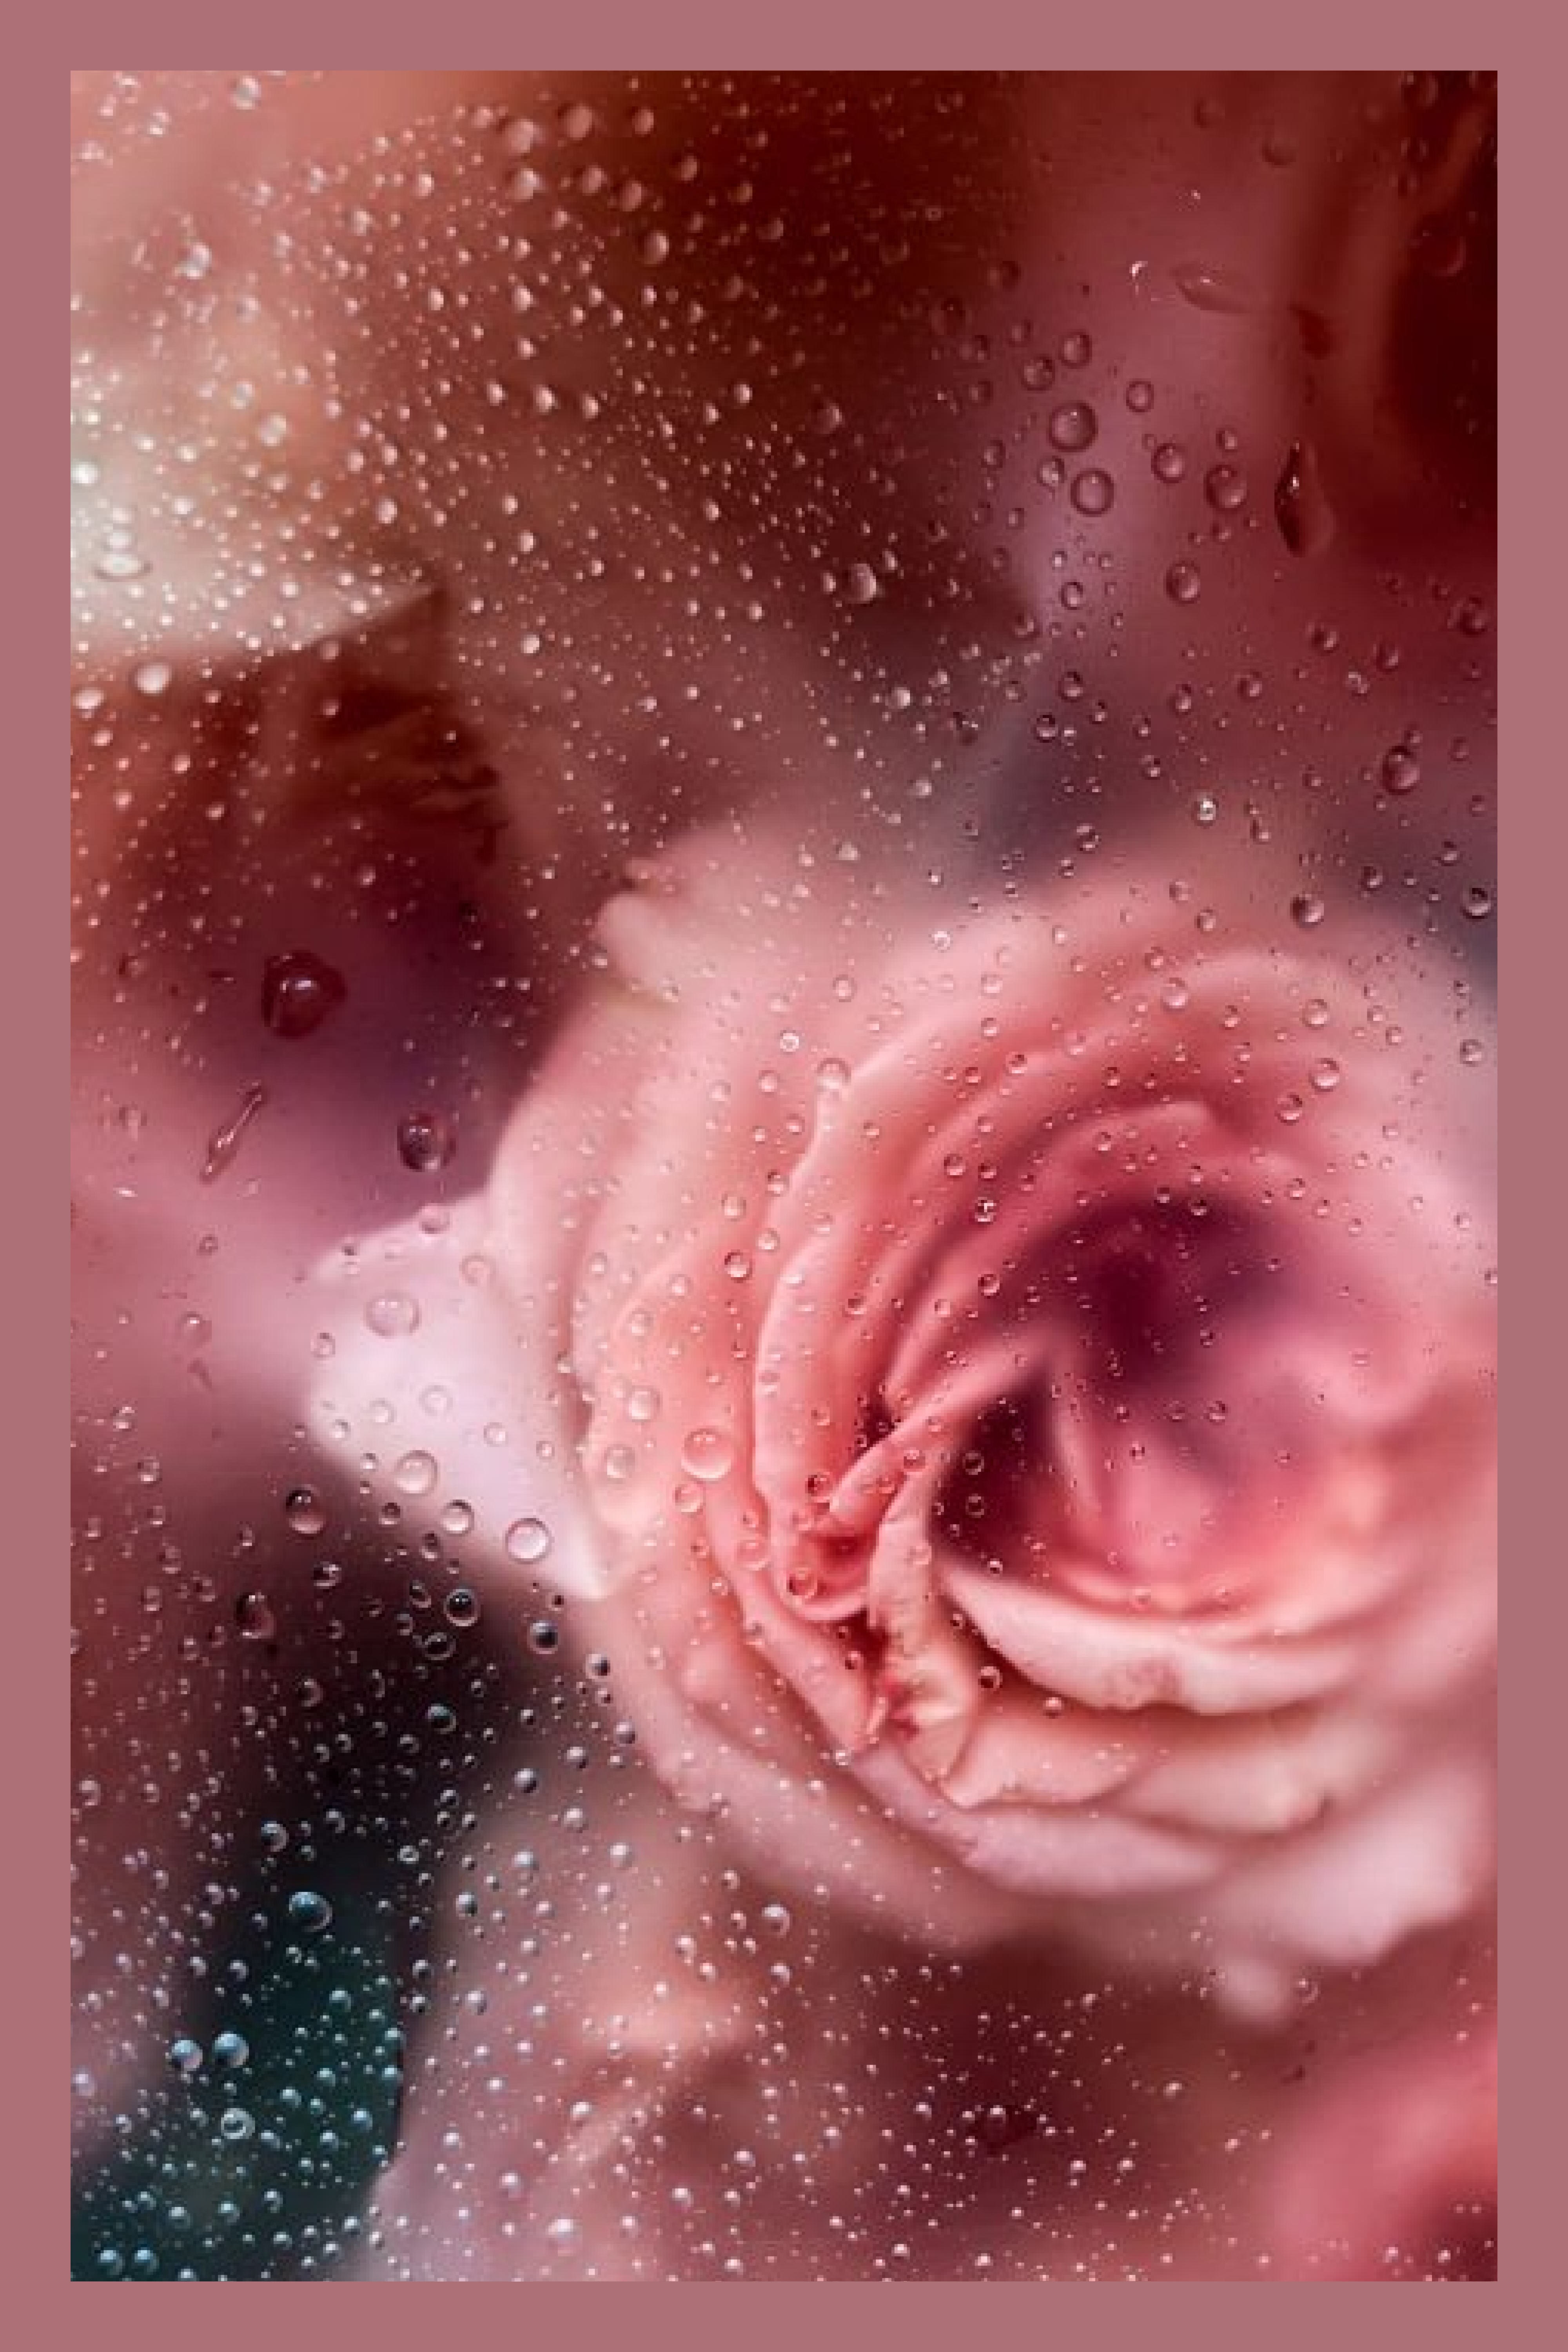 Rain drops on the glass with pink flower bouquet.